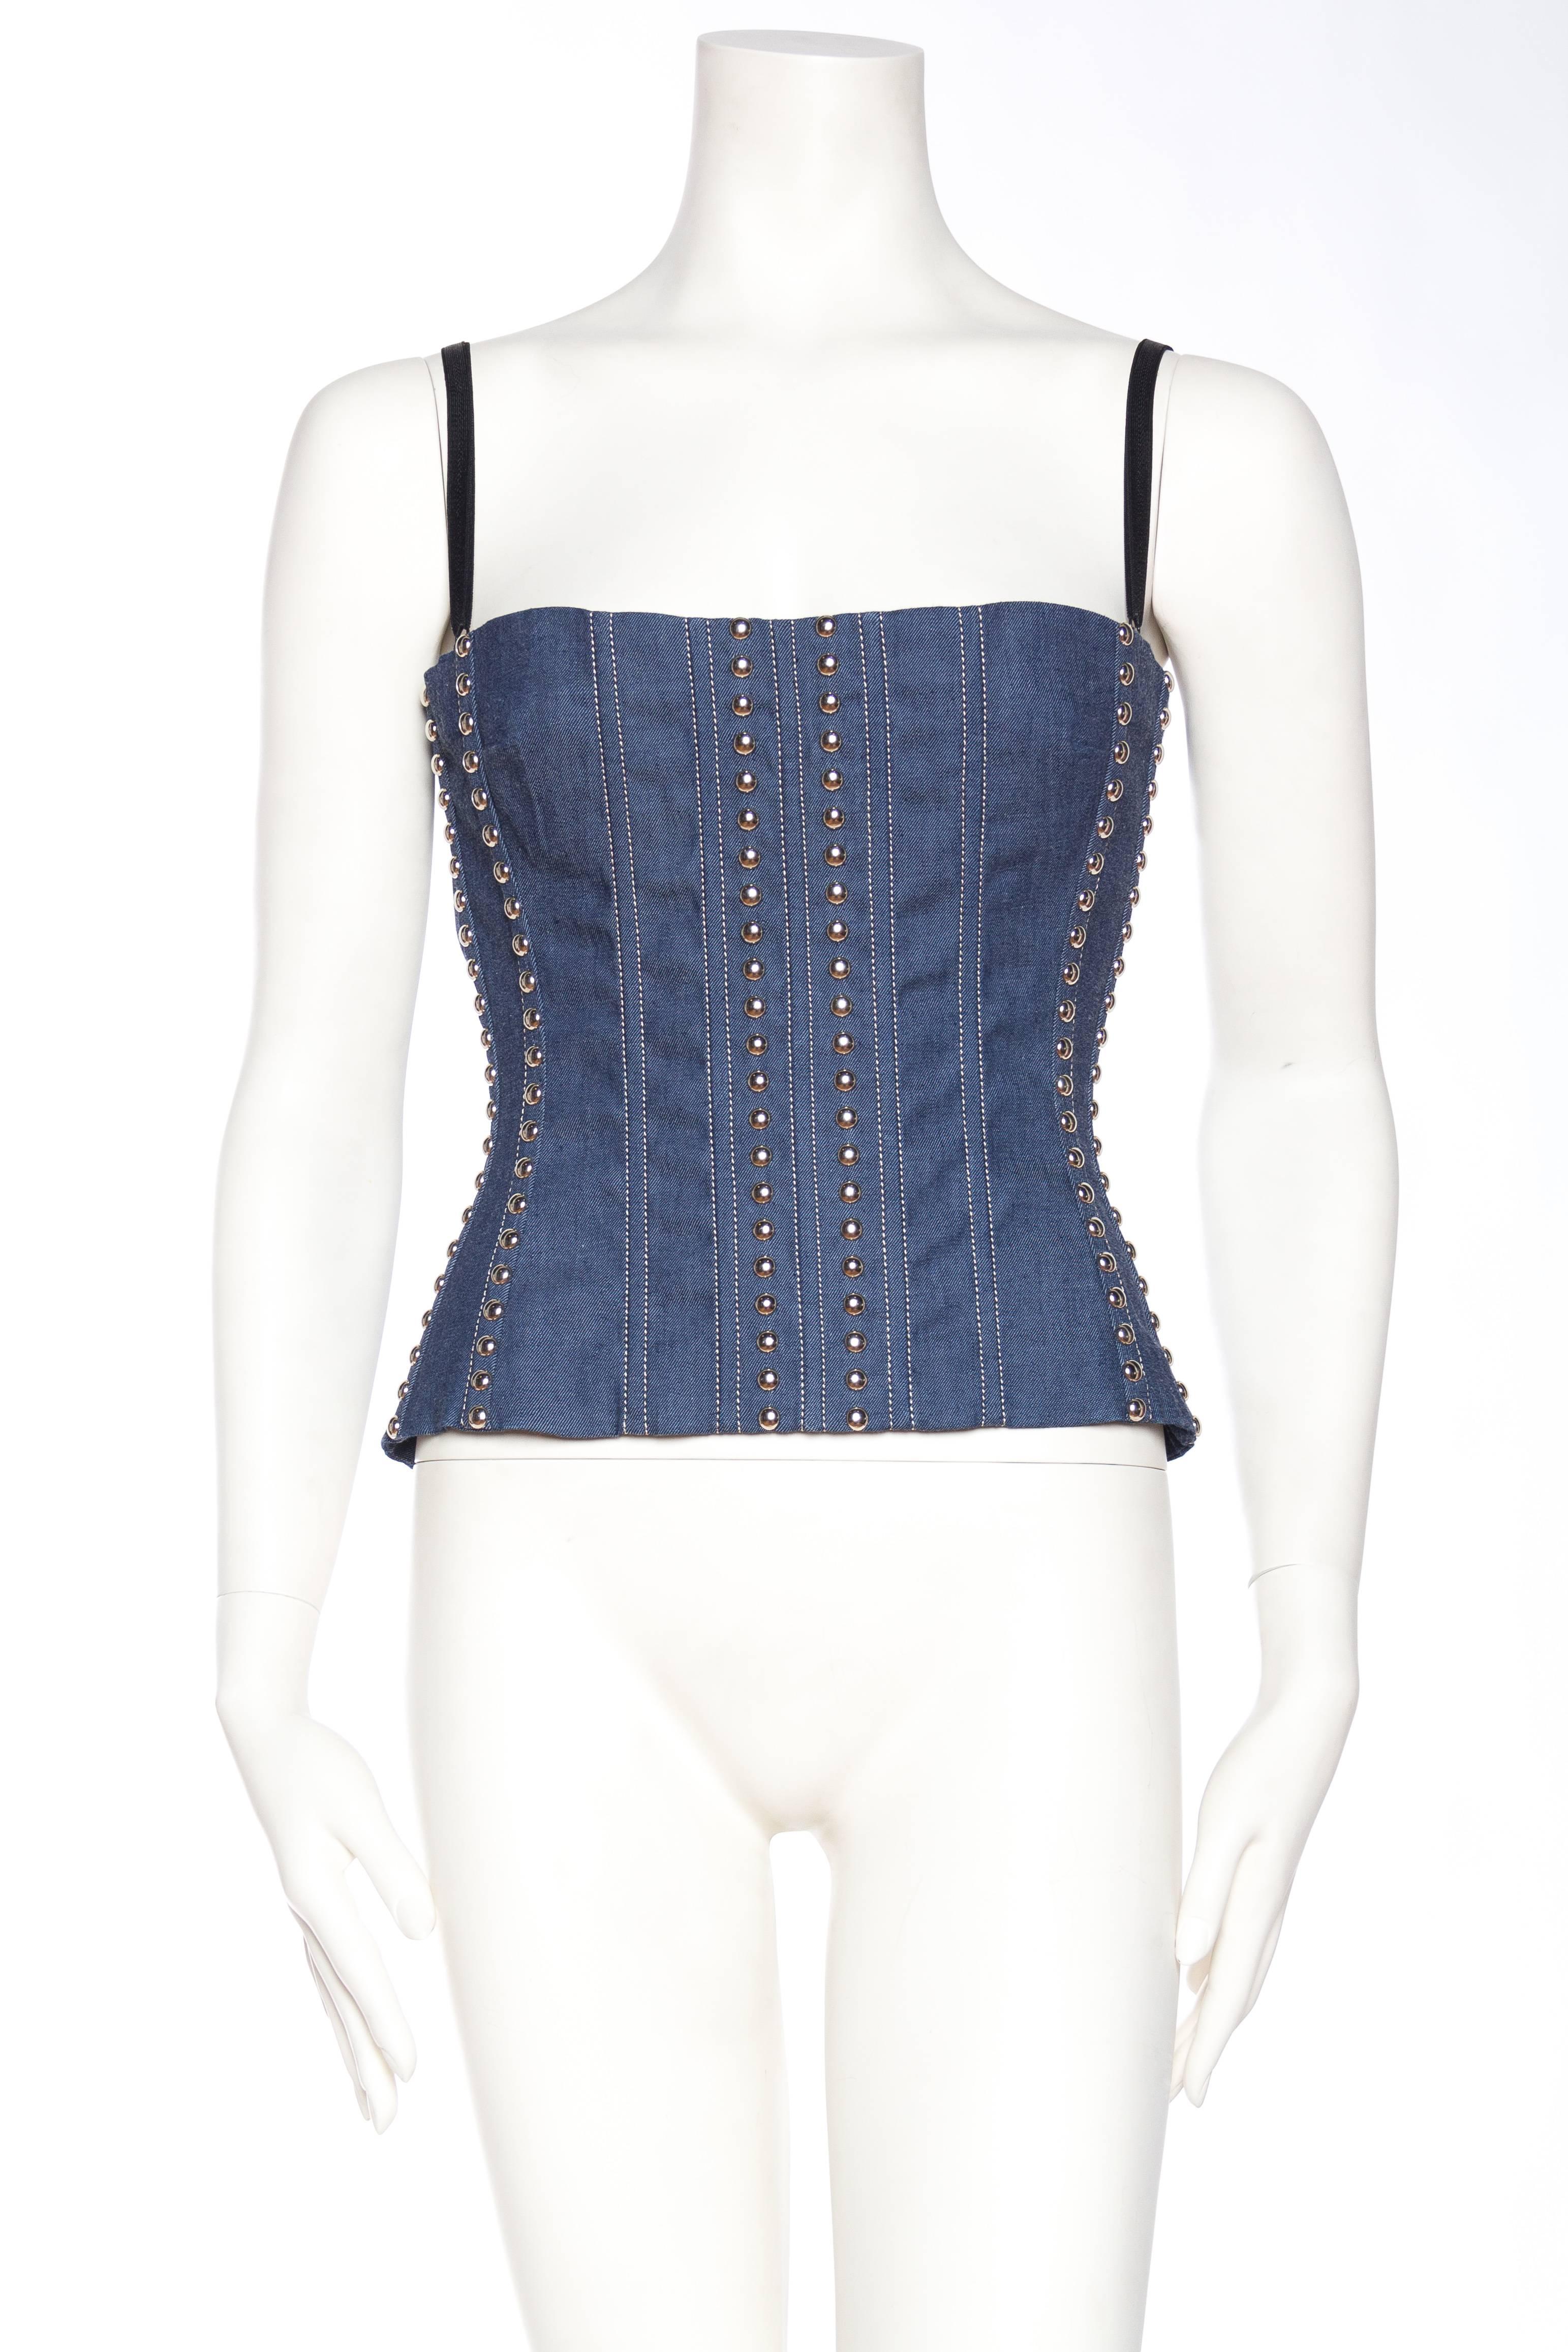 Corset has internal bra which is meant to be seen over the top of the corset when it is worn. 